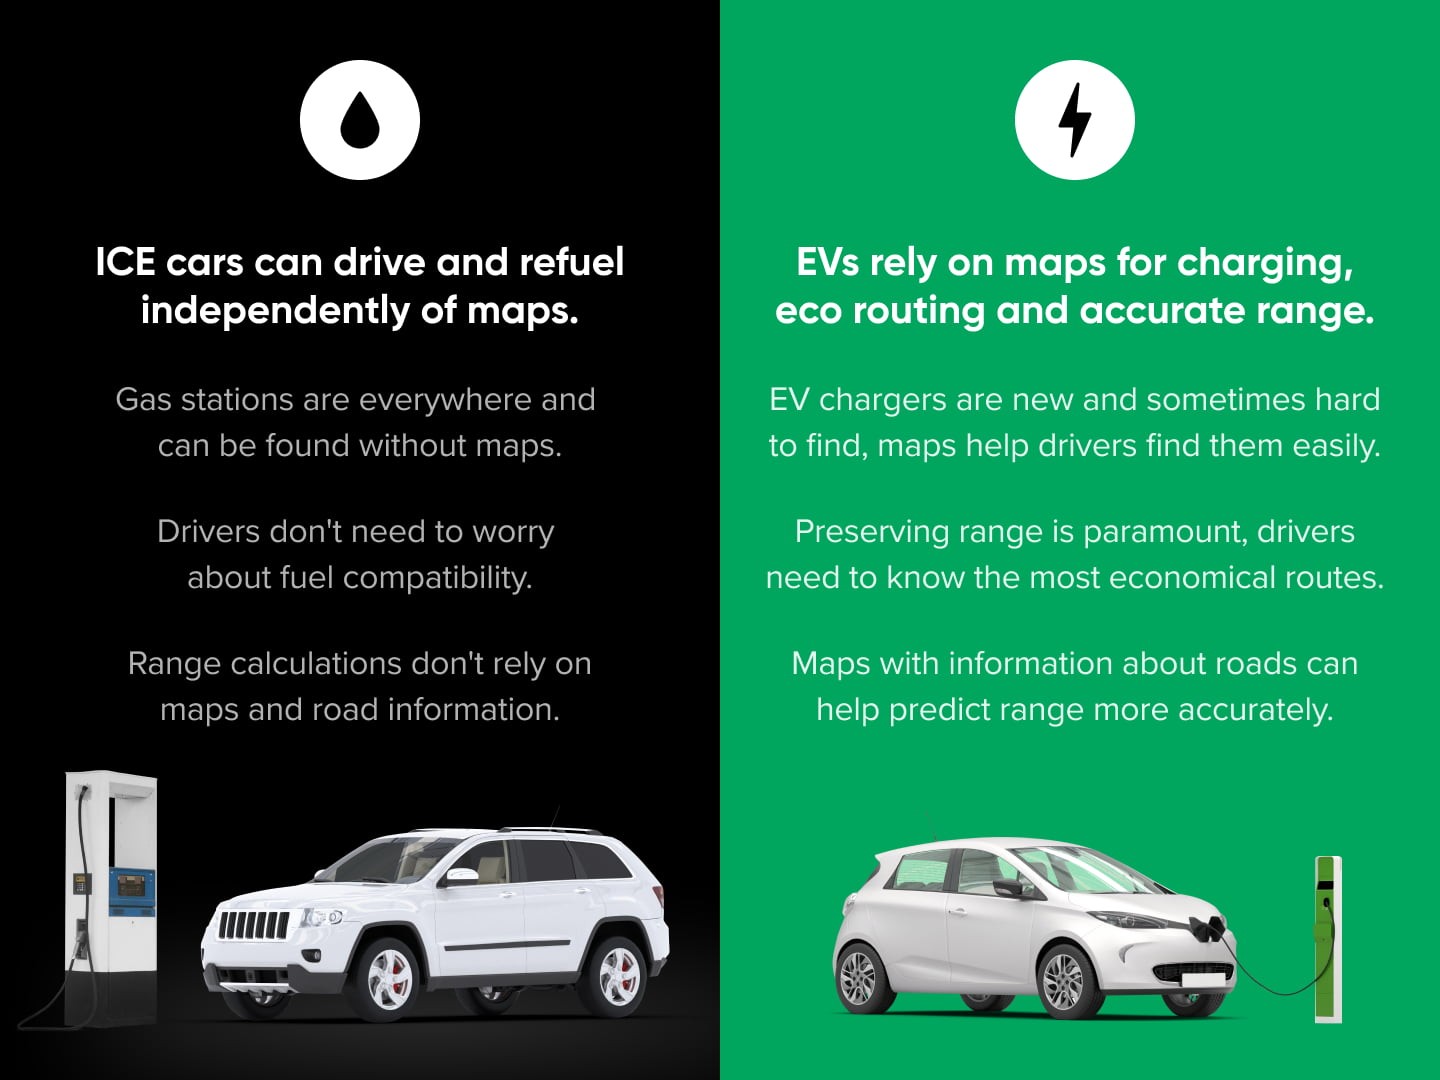 An illustration showing the differences between EV and combustion engine reliance on maps.